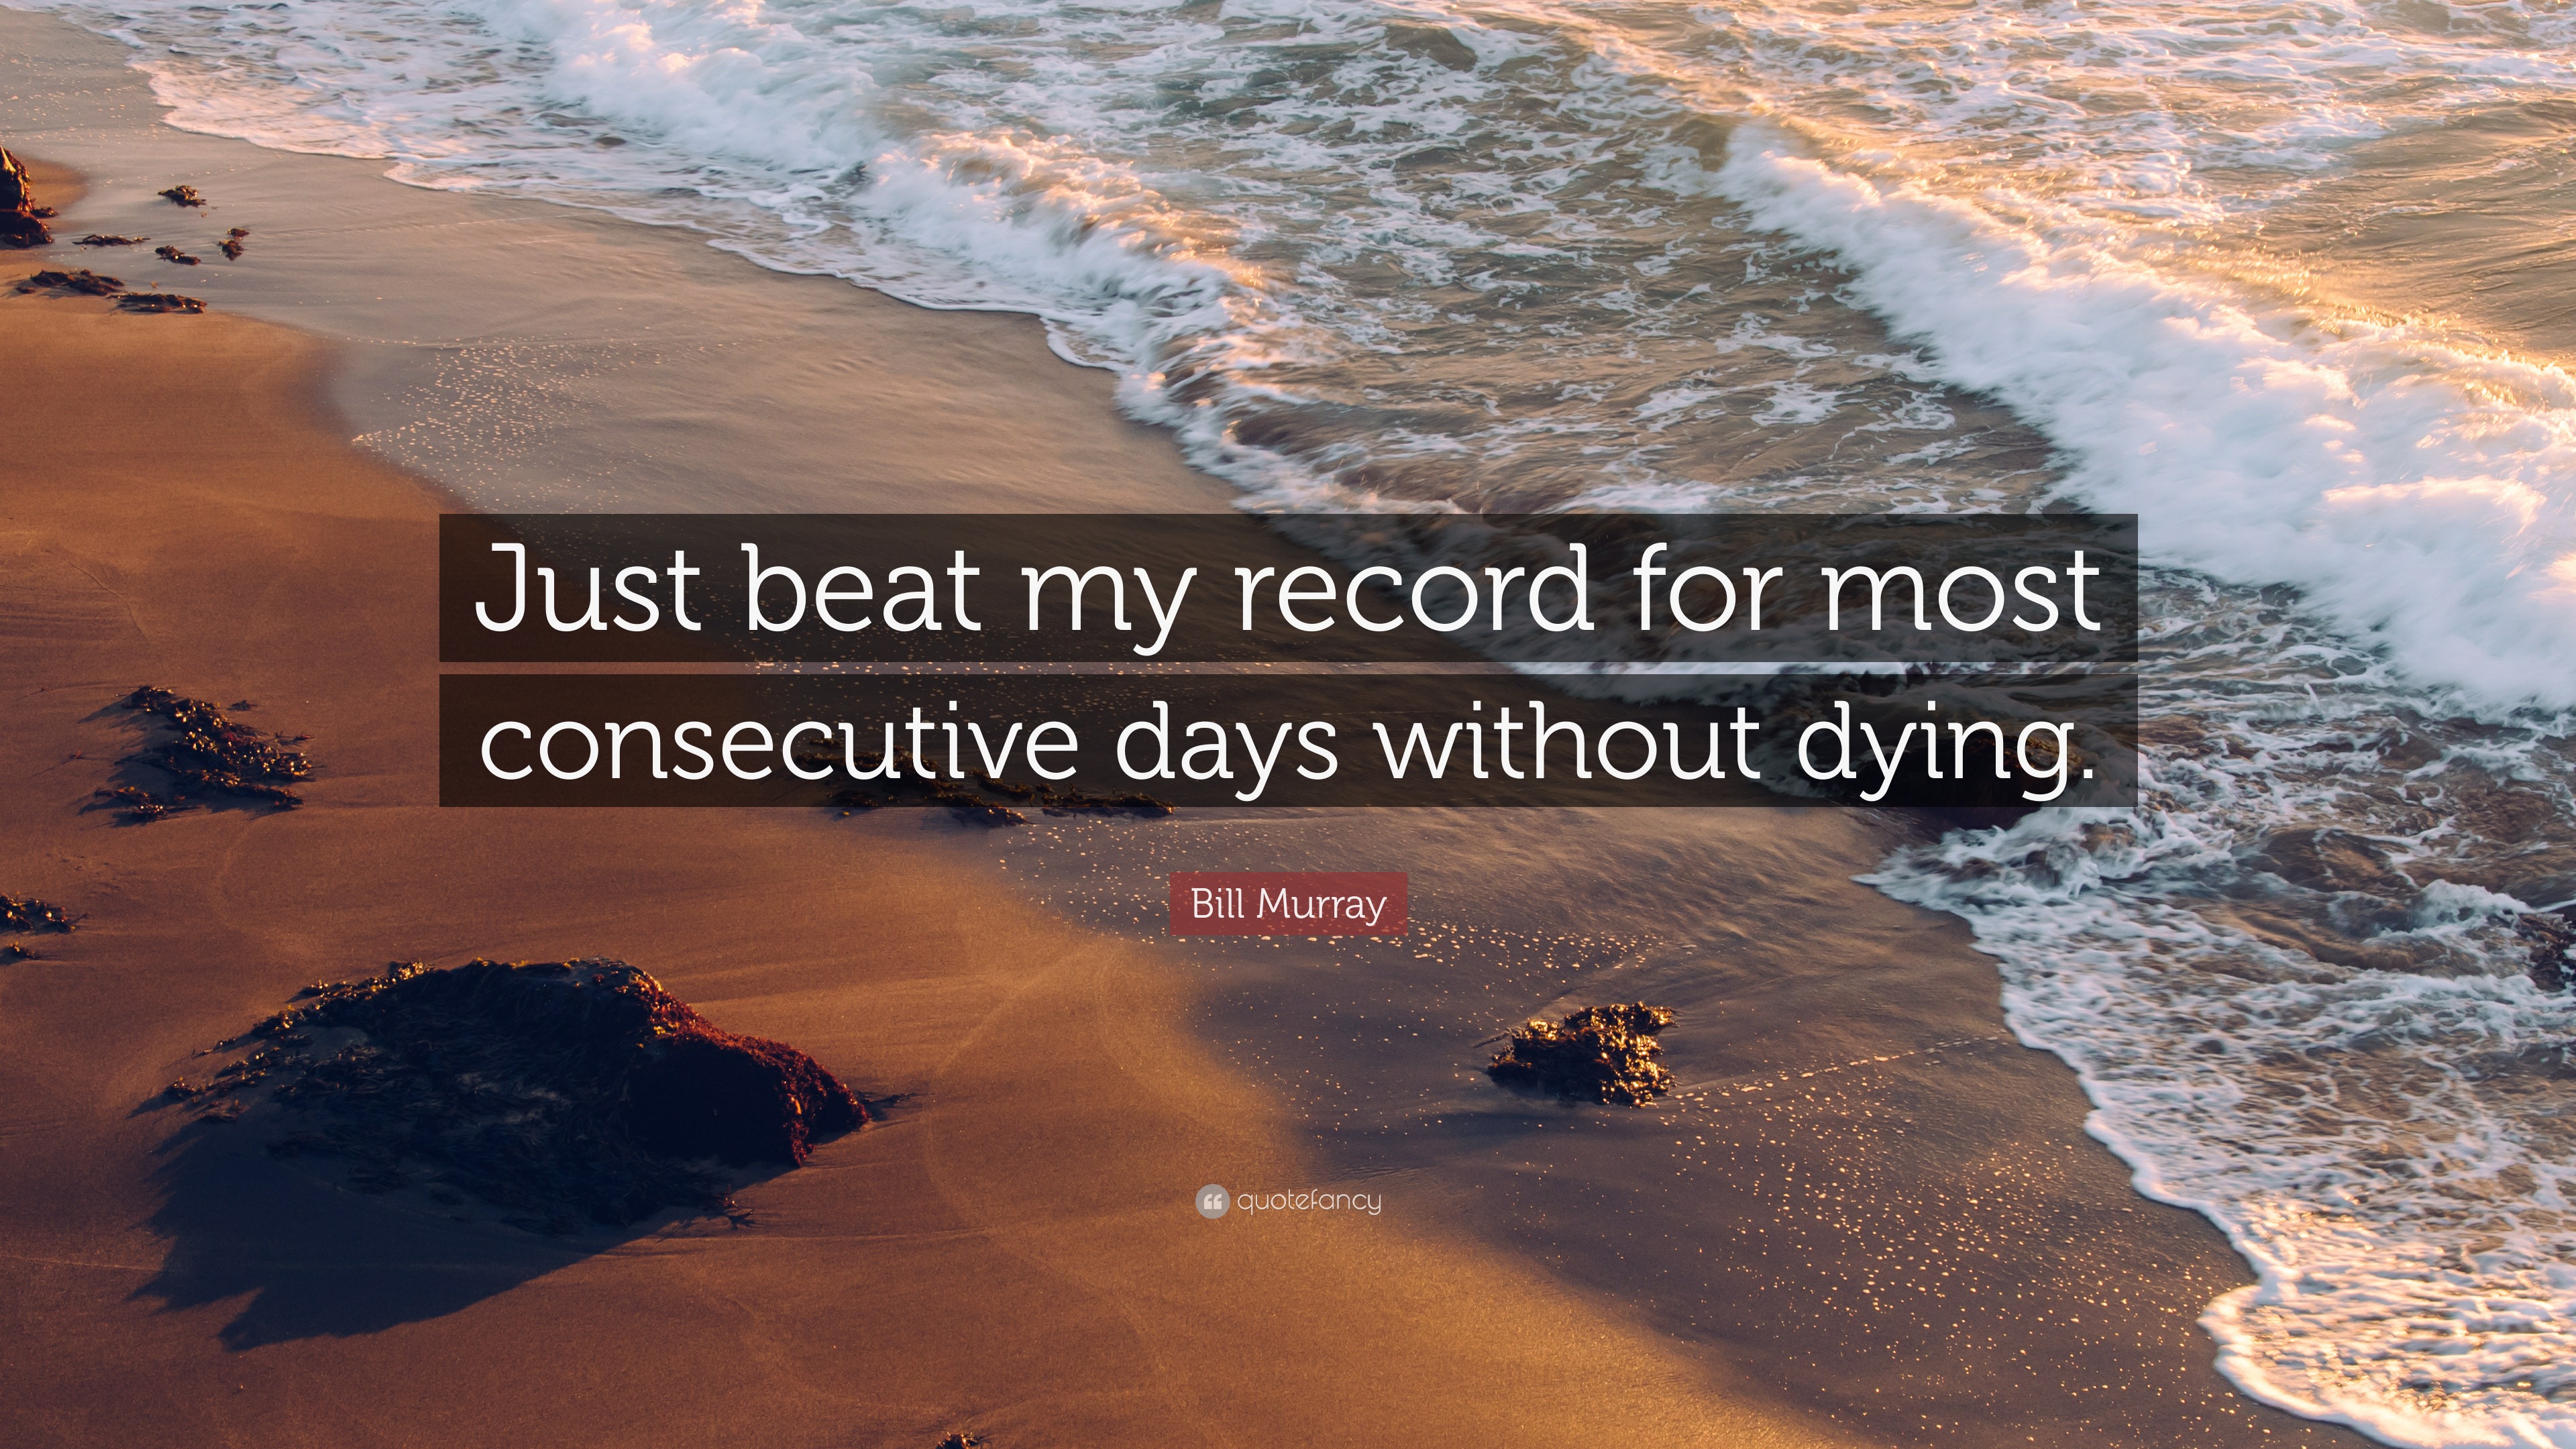 Bill Murray “Just beat record for consecutive days without dying.”